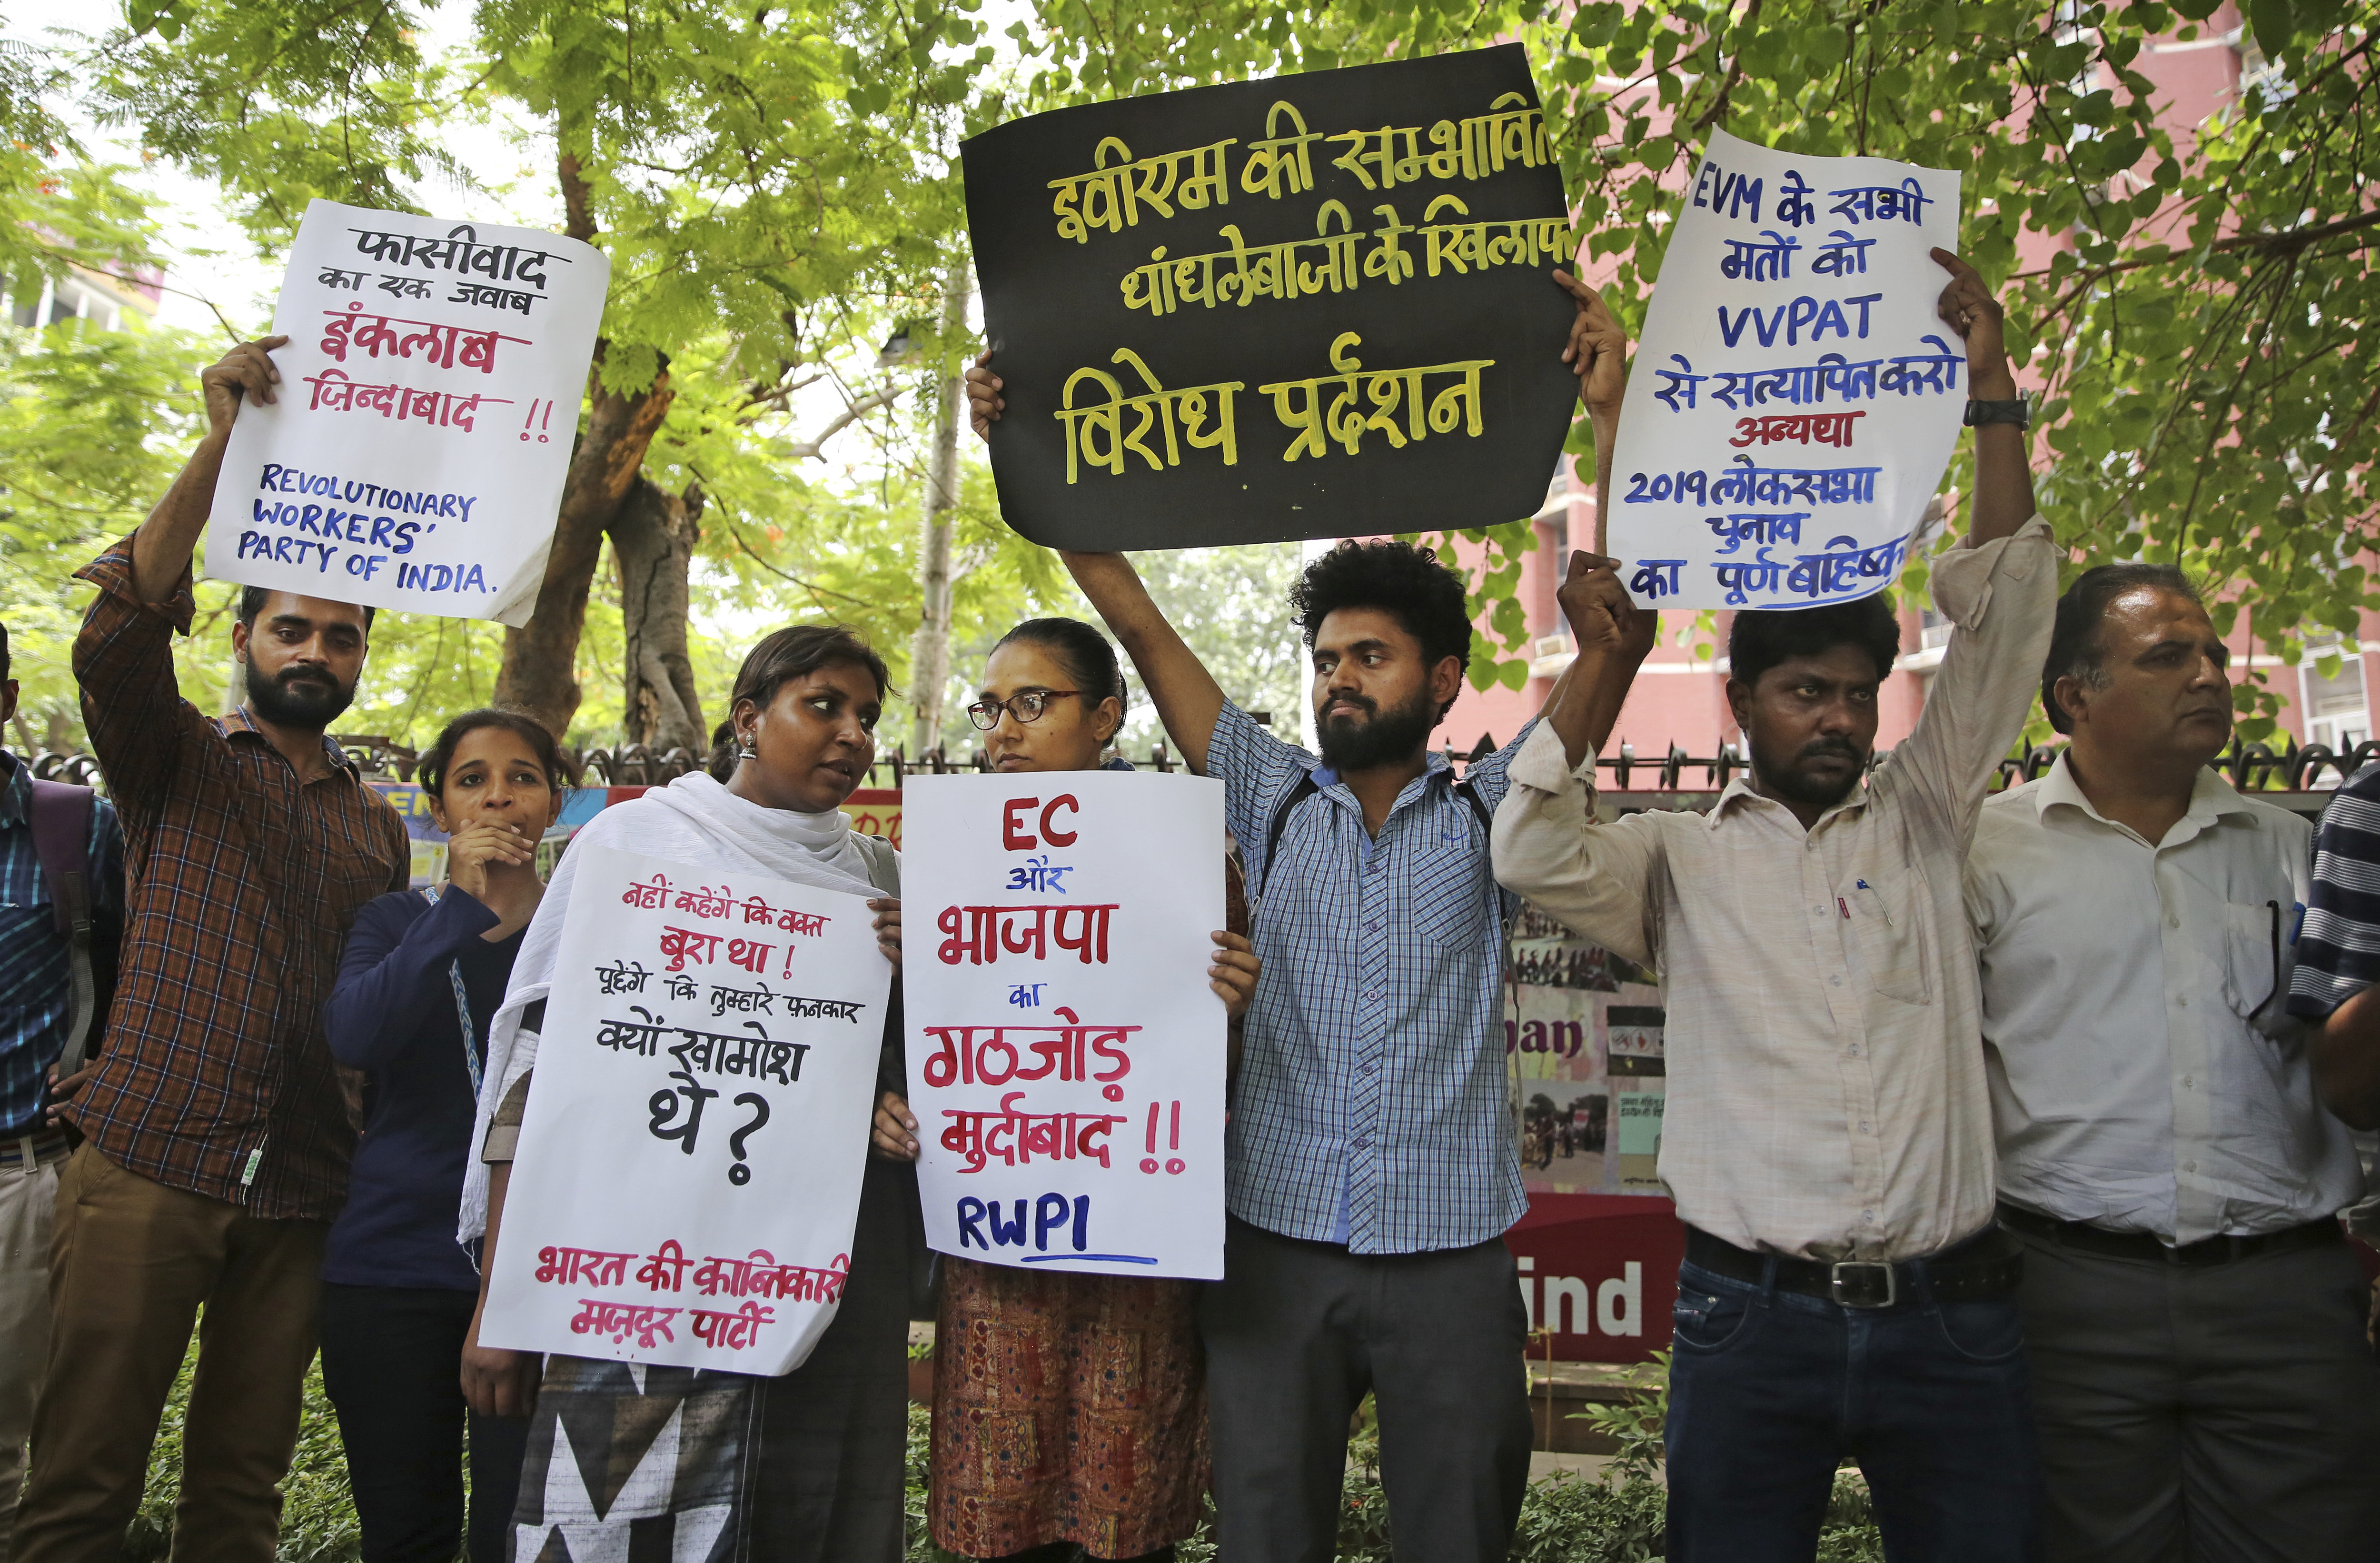 Activists of Revolutionary Workers' Party of India hold placards as they protest EVM tampering outside the Election Commission office in New Delhi on May 22, 2019.